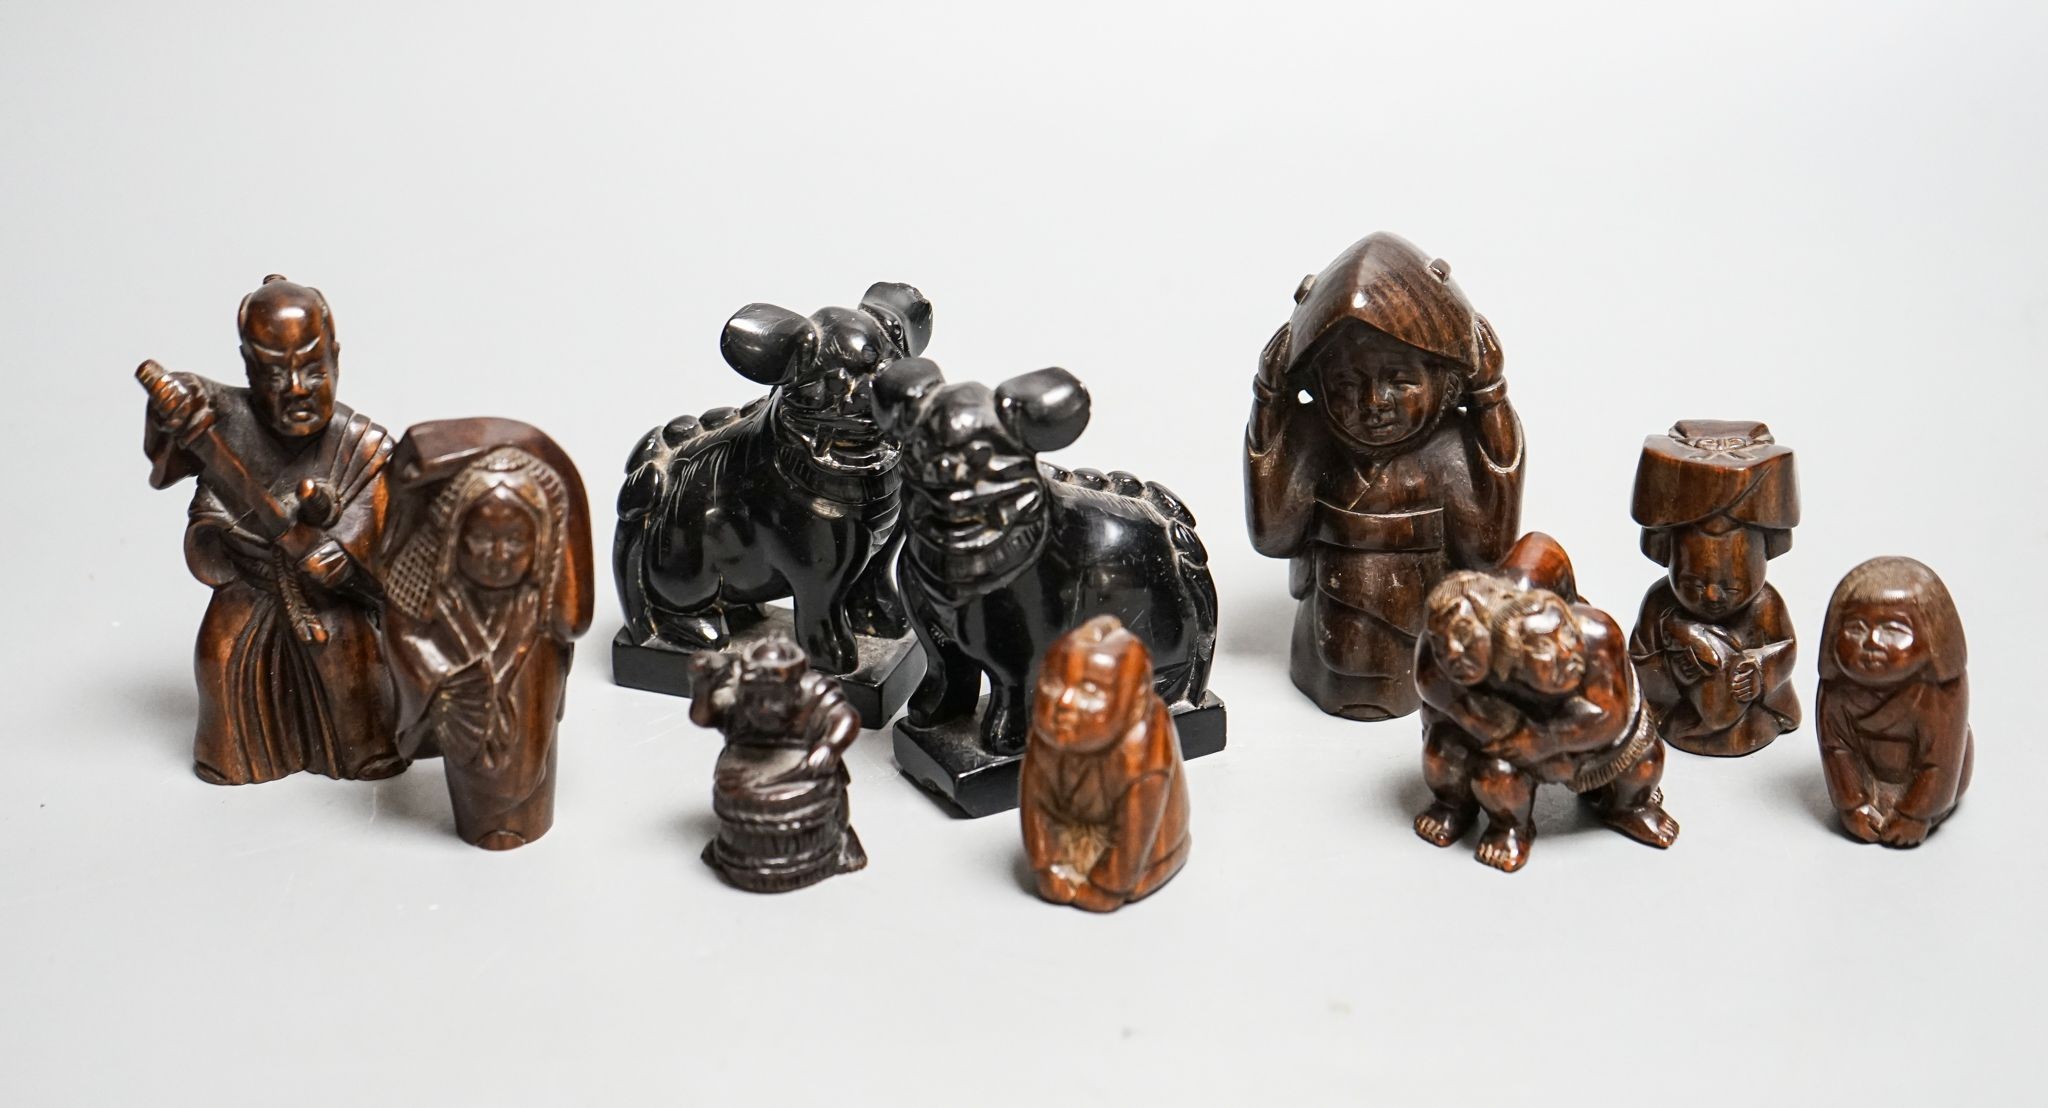 A quantity of hardwood netsuke and other carvings, signed